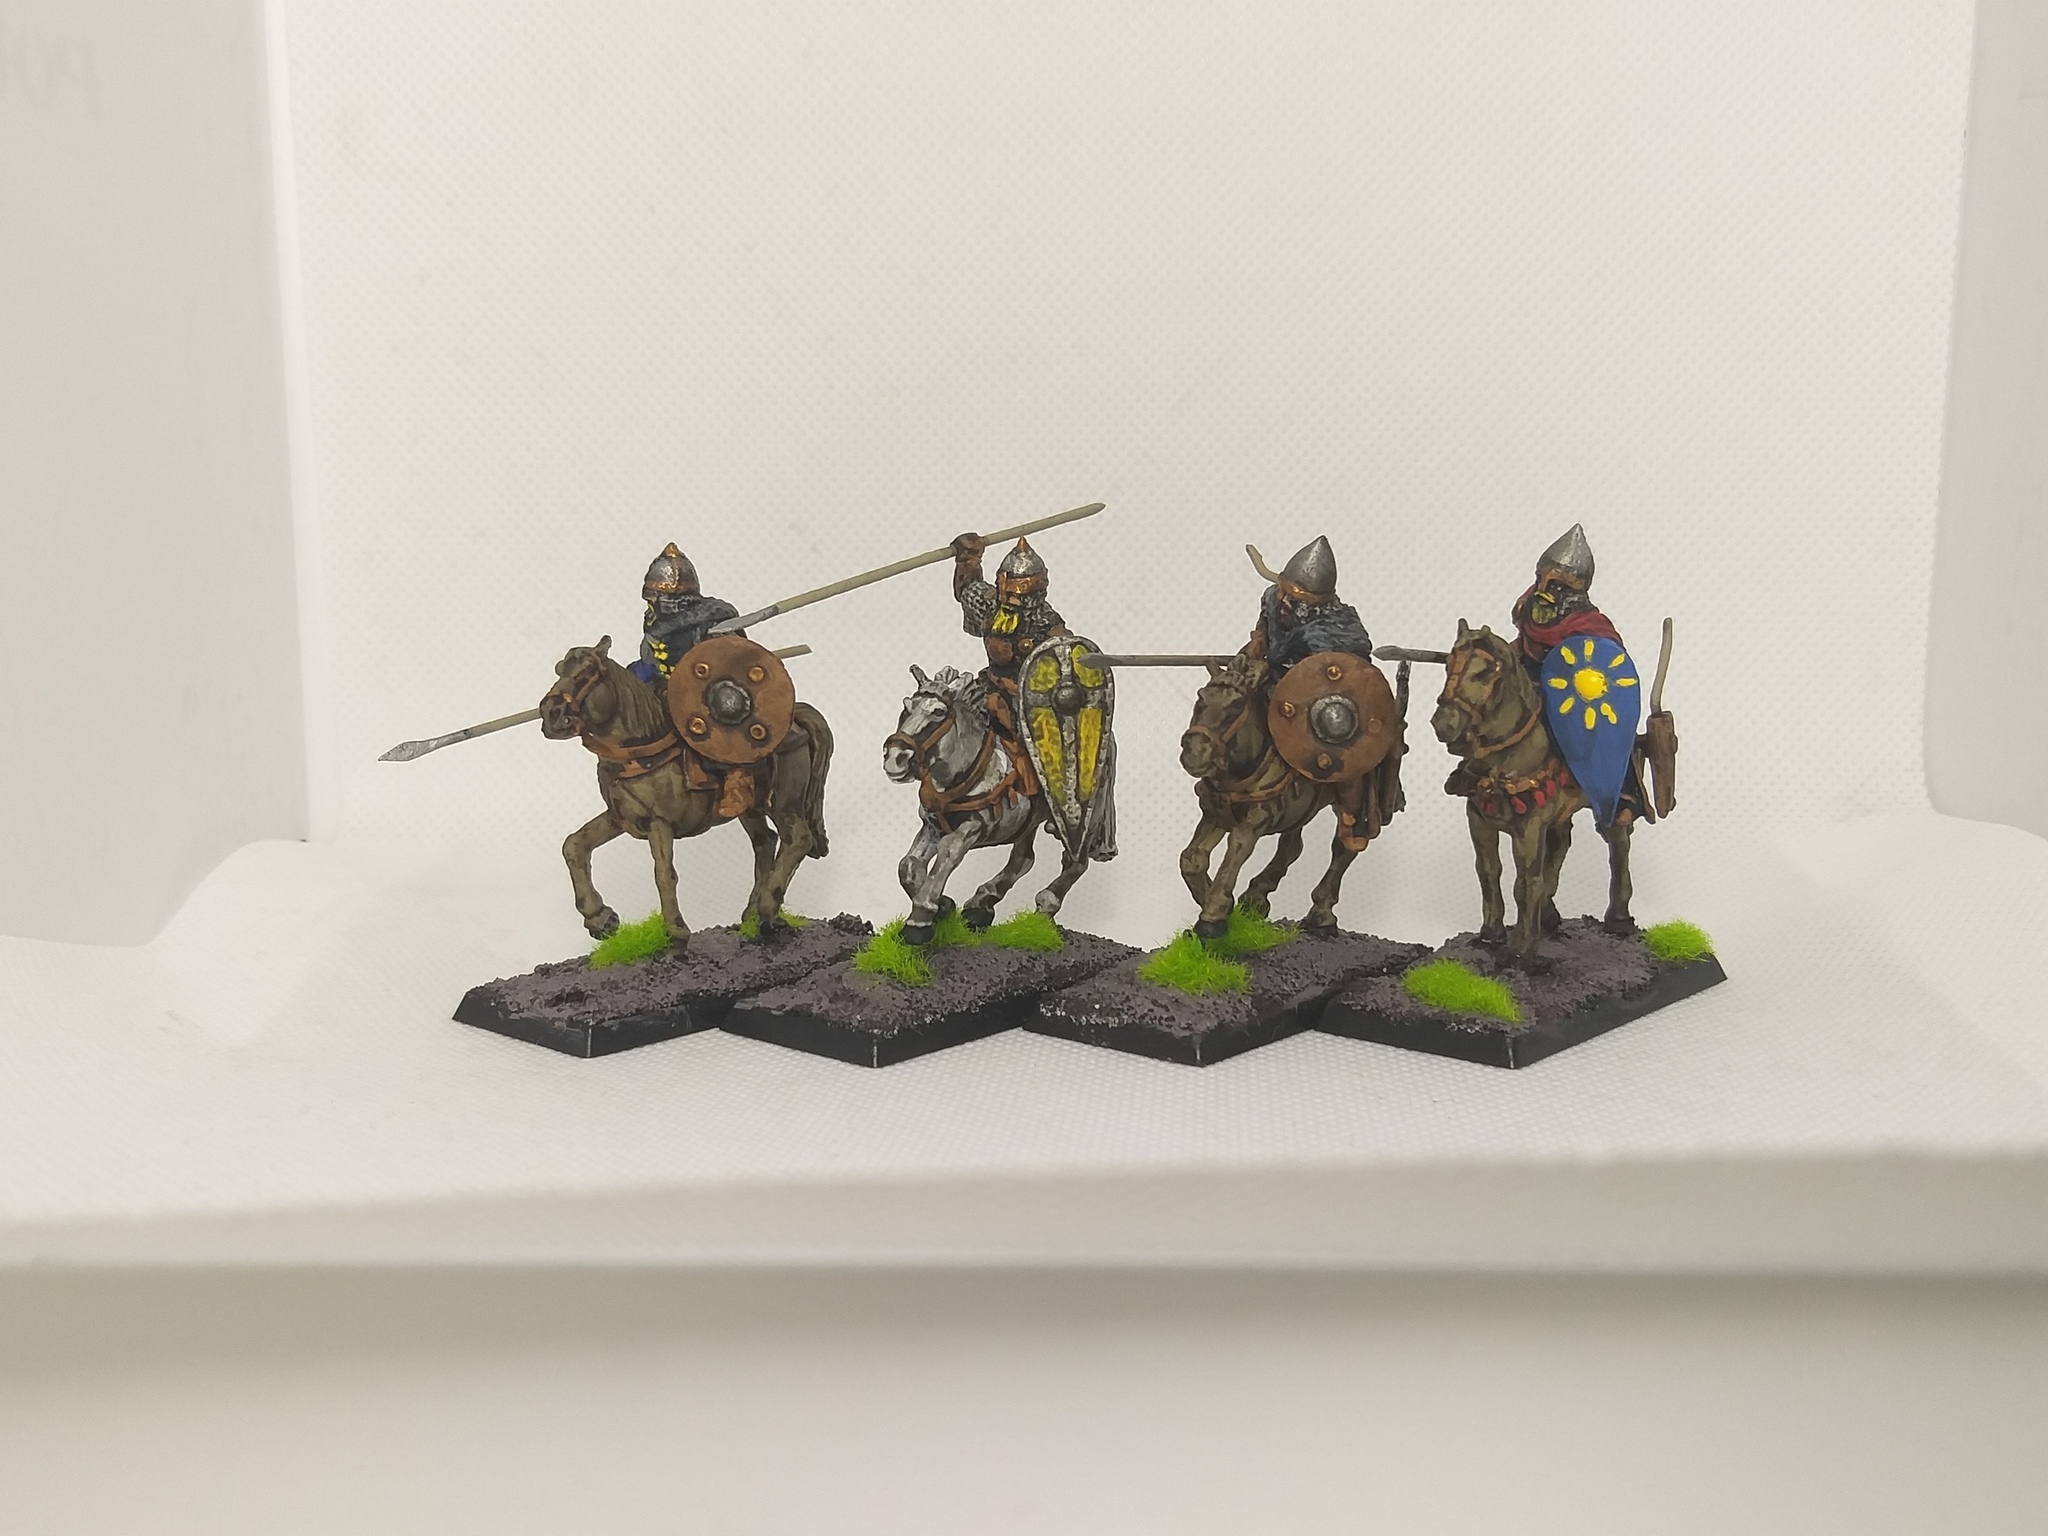 Army of Kievan Rus for the 13th century according to the Hail Caesar system (Long post!) - My, Rus, Russia, Miniature, Military Historical Miniature, Wargame, Board games, Longpost, Desktop wargame